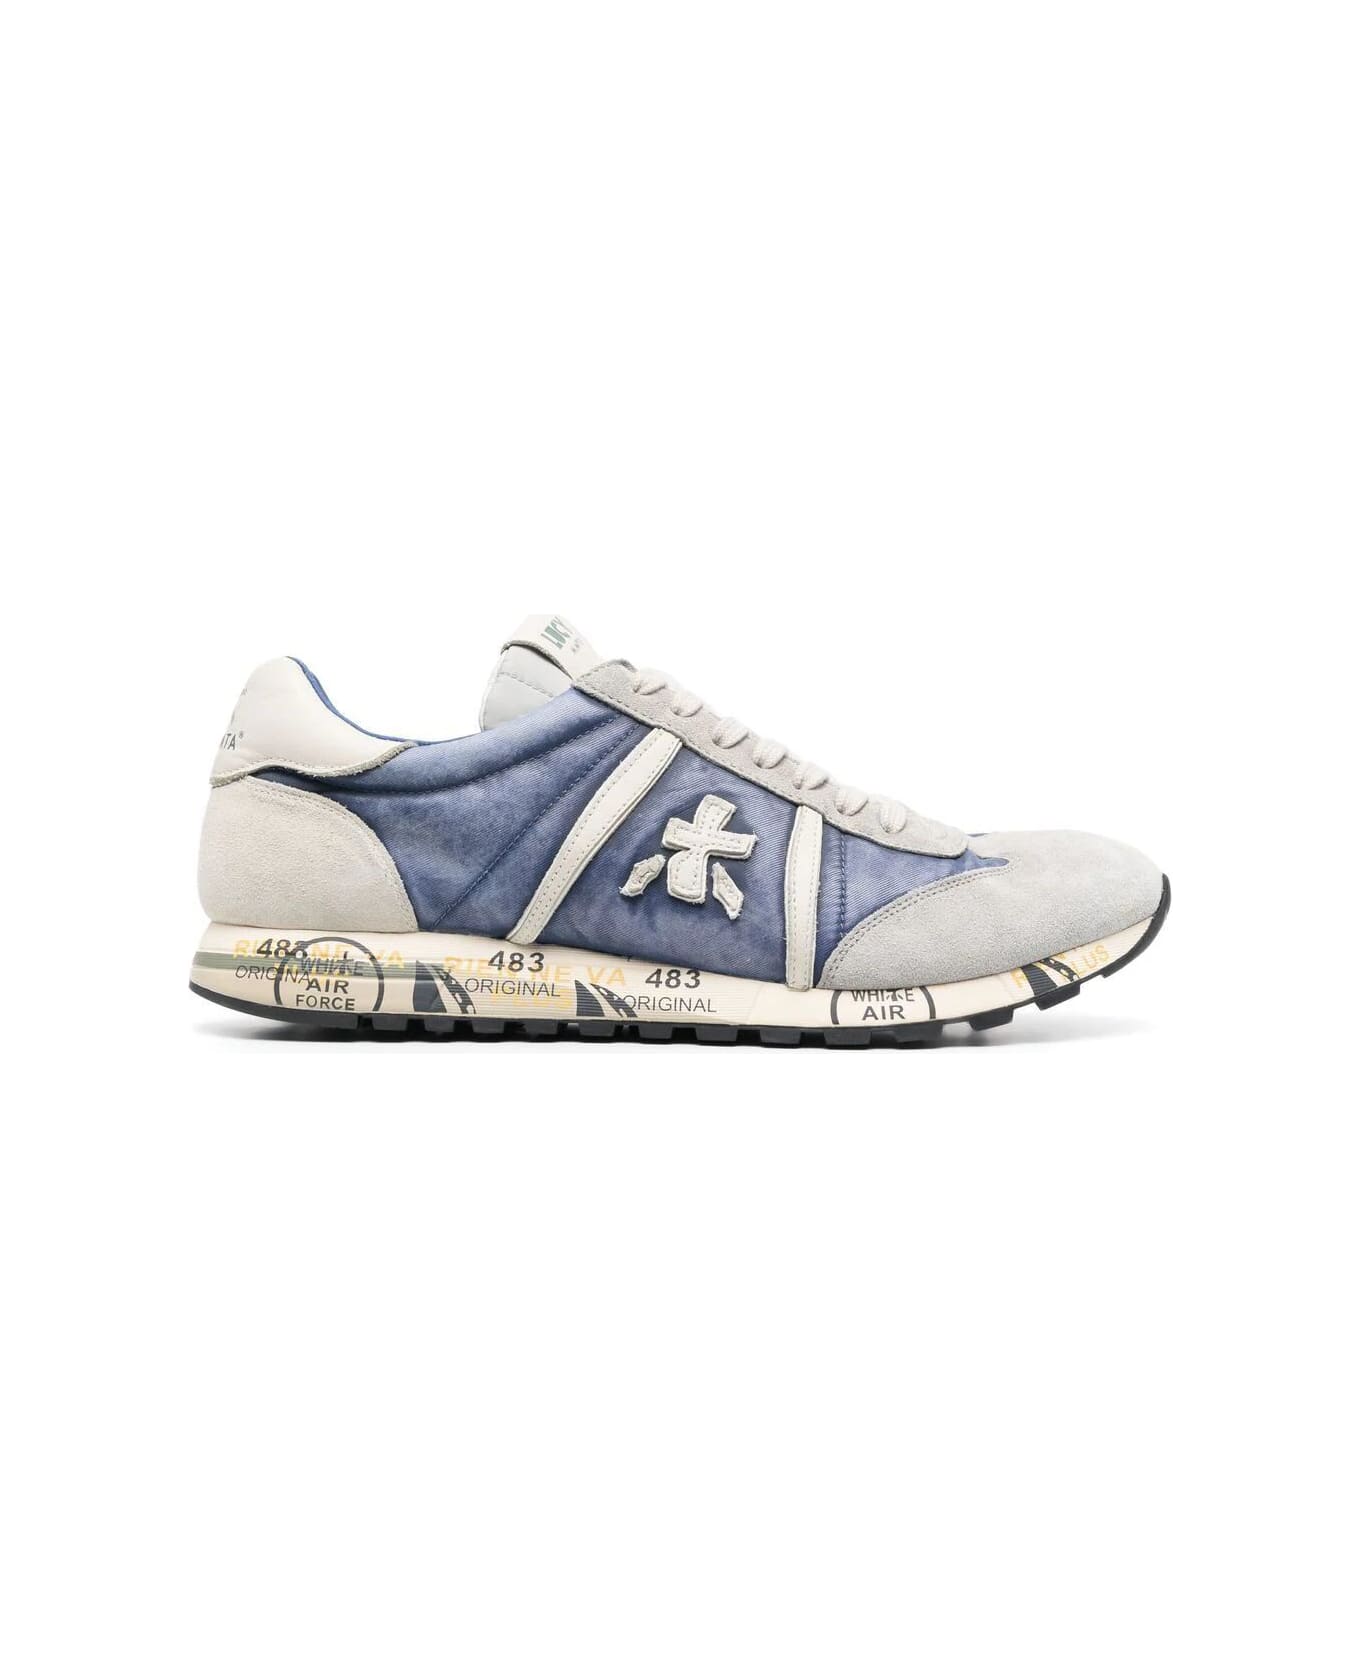 Premiata Lucy Sneakers - Blue スニーカー